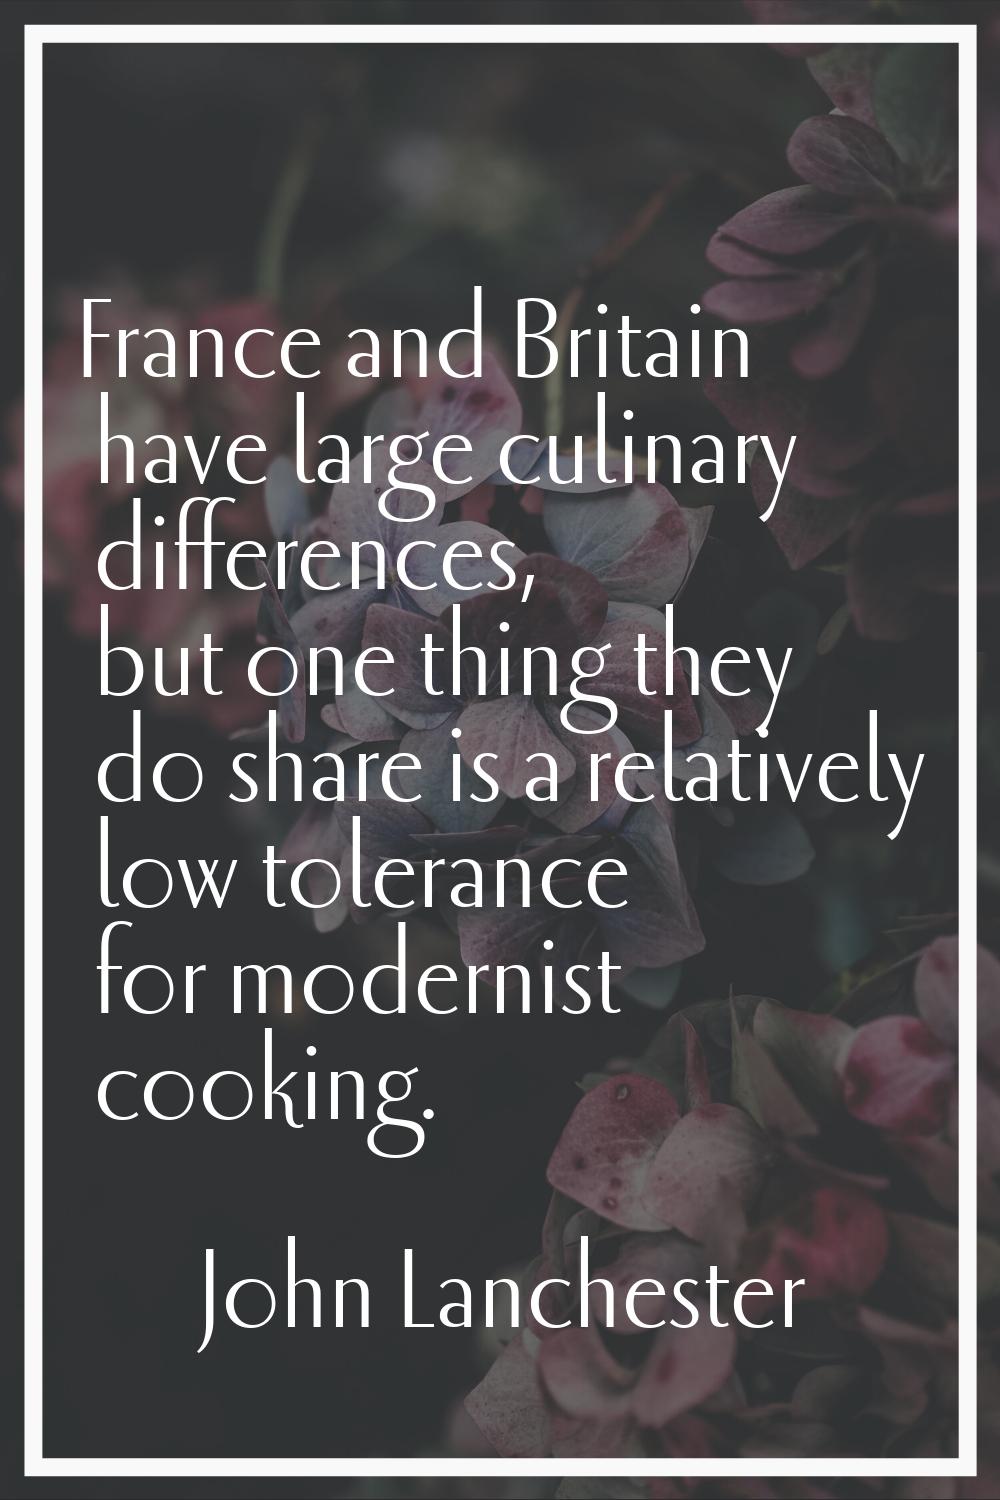 France and Britain have large culinary differences, but one thing they do share is a relatively low